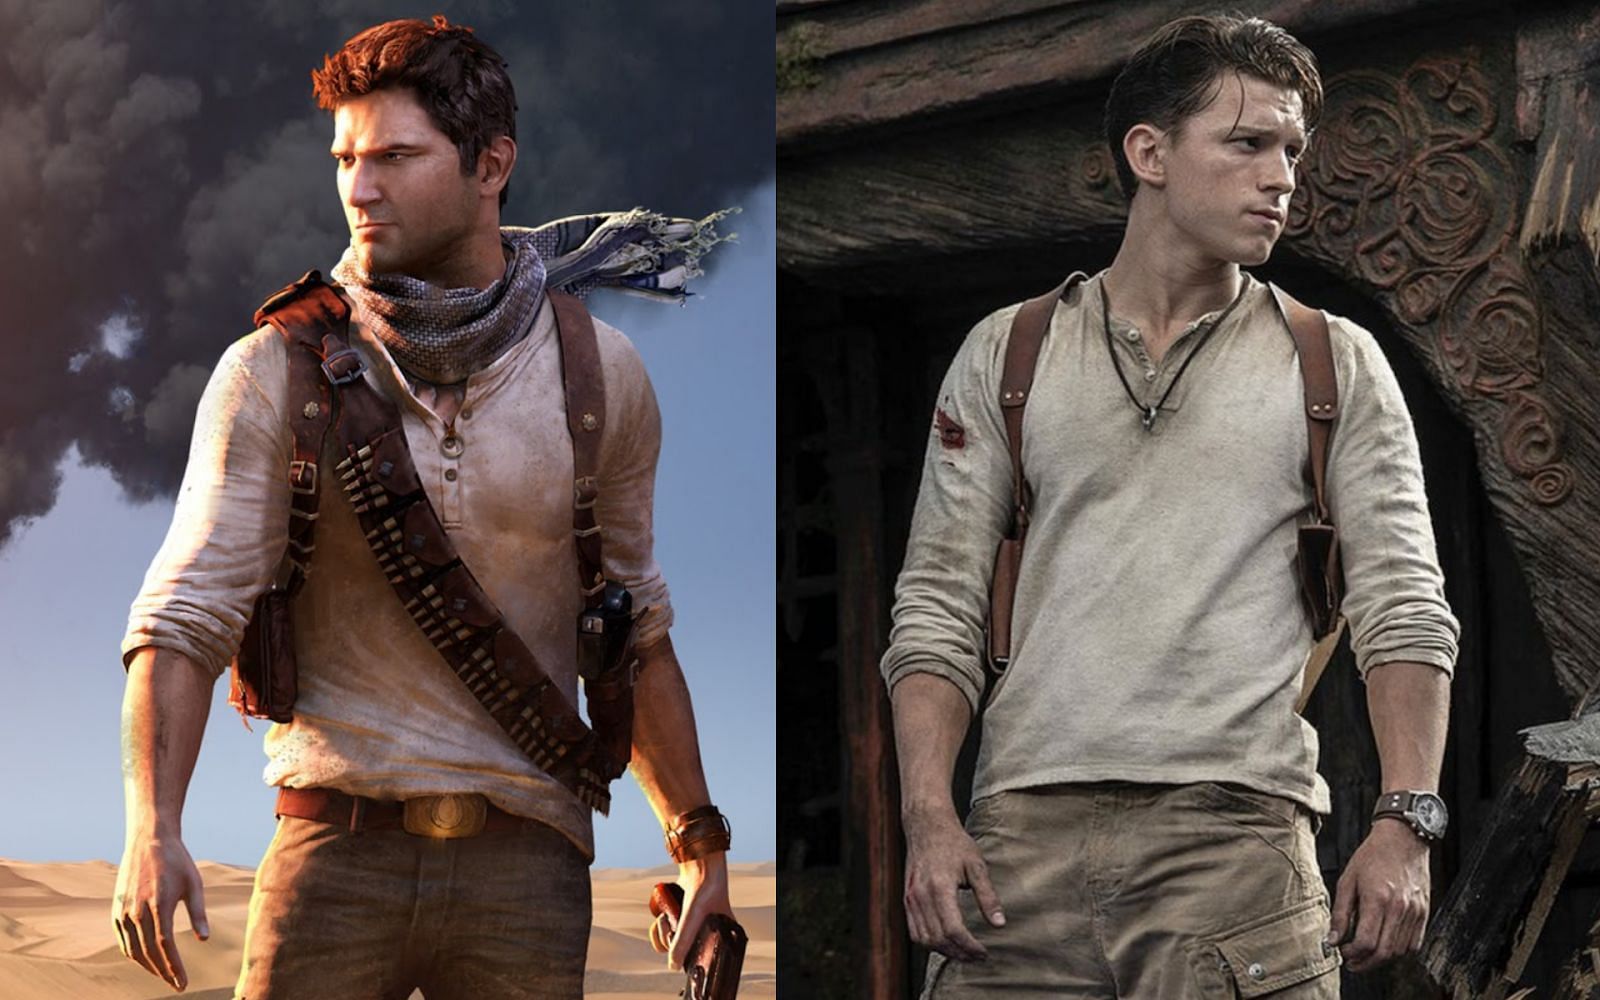 Nathan Drake from the Uncharted game and movie